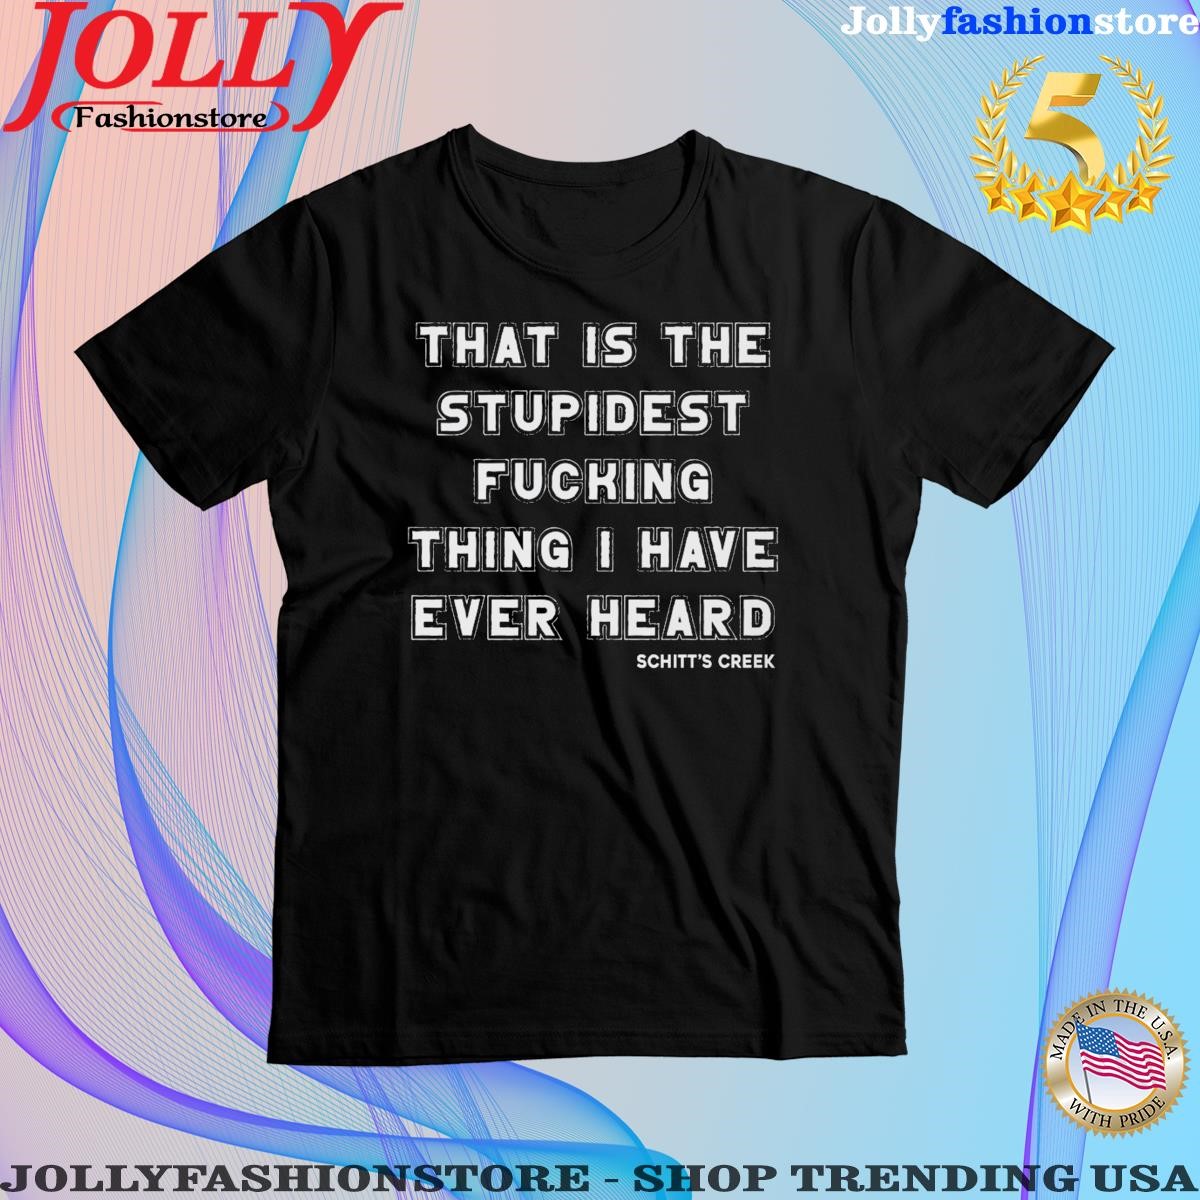 That is the stupidest fucking thing I have ever heard schitt's creek shirt